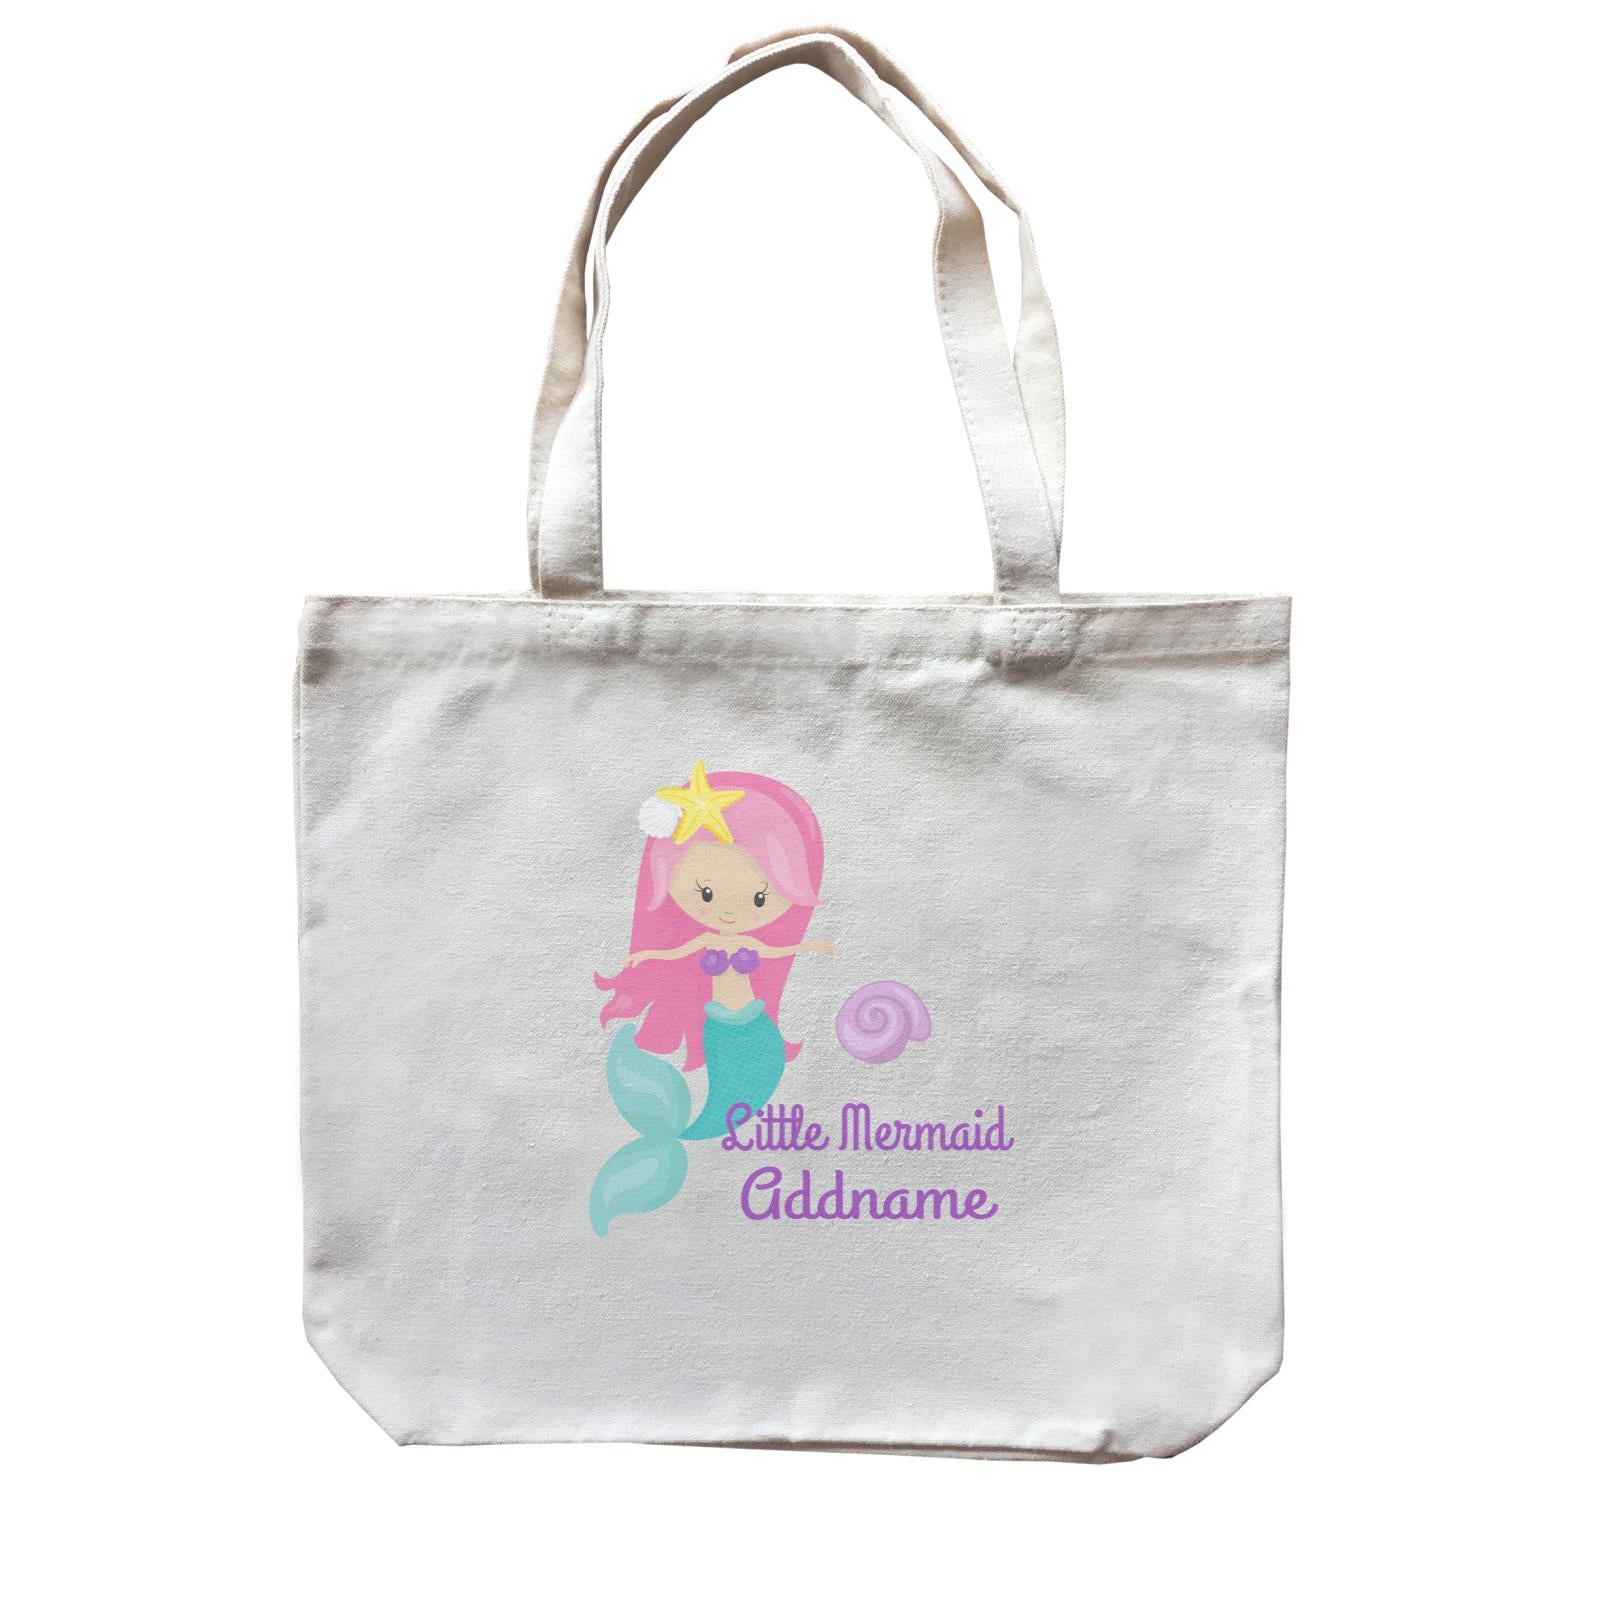 Little Mermaid Upright with Seashell Addname Canvas Bag